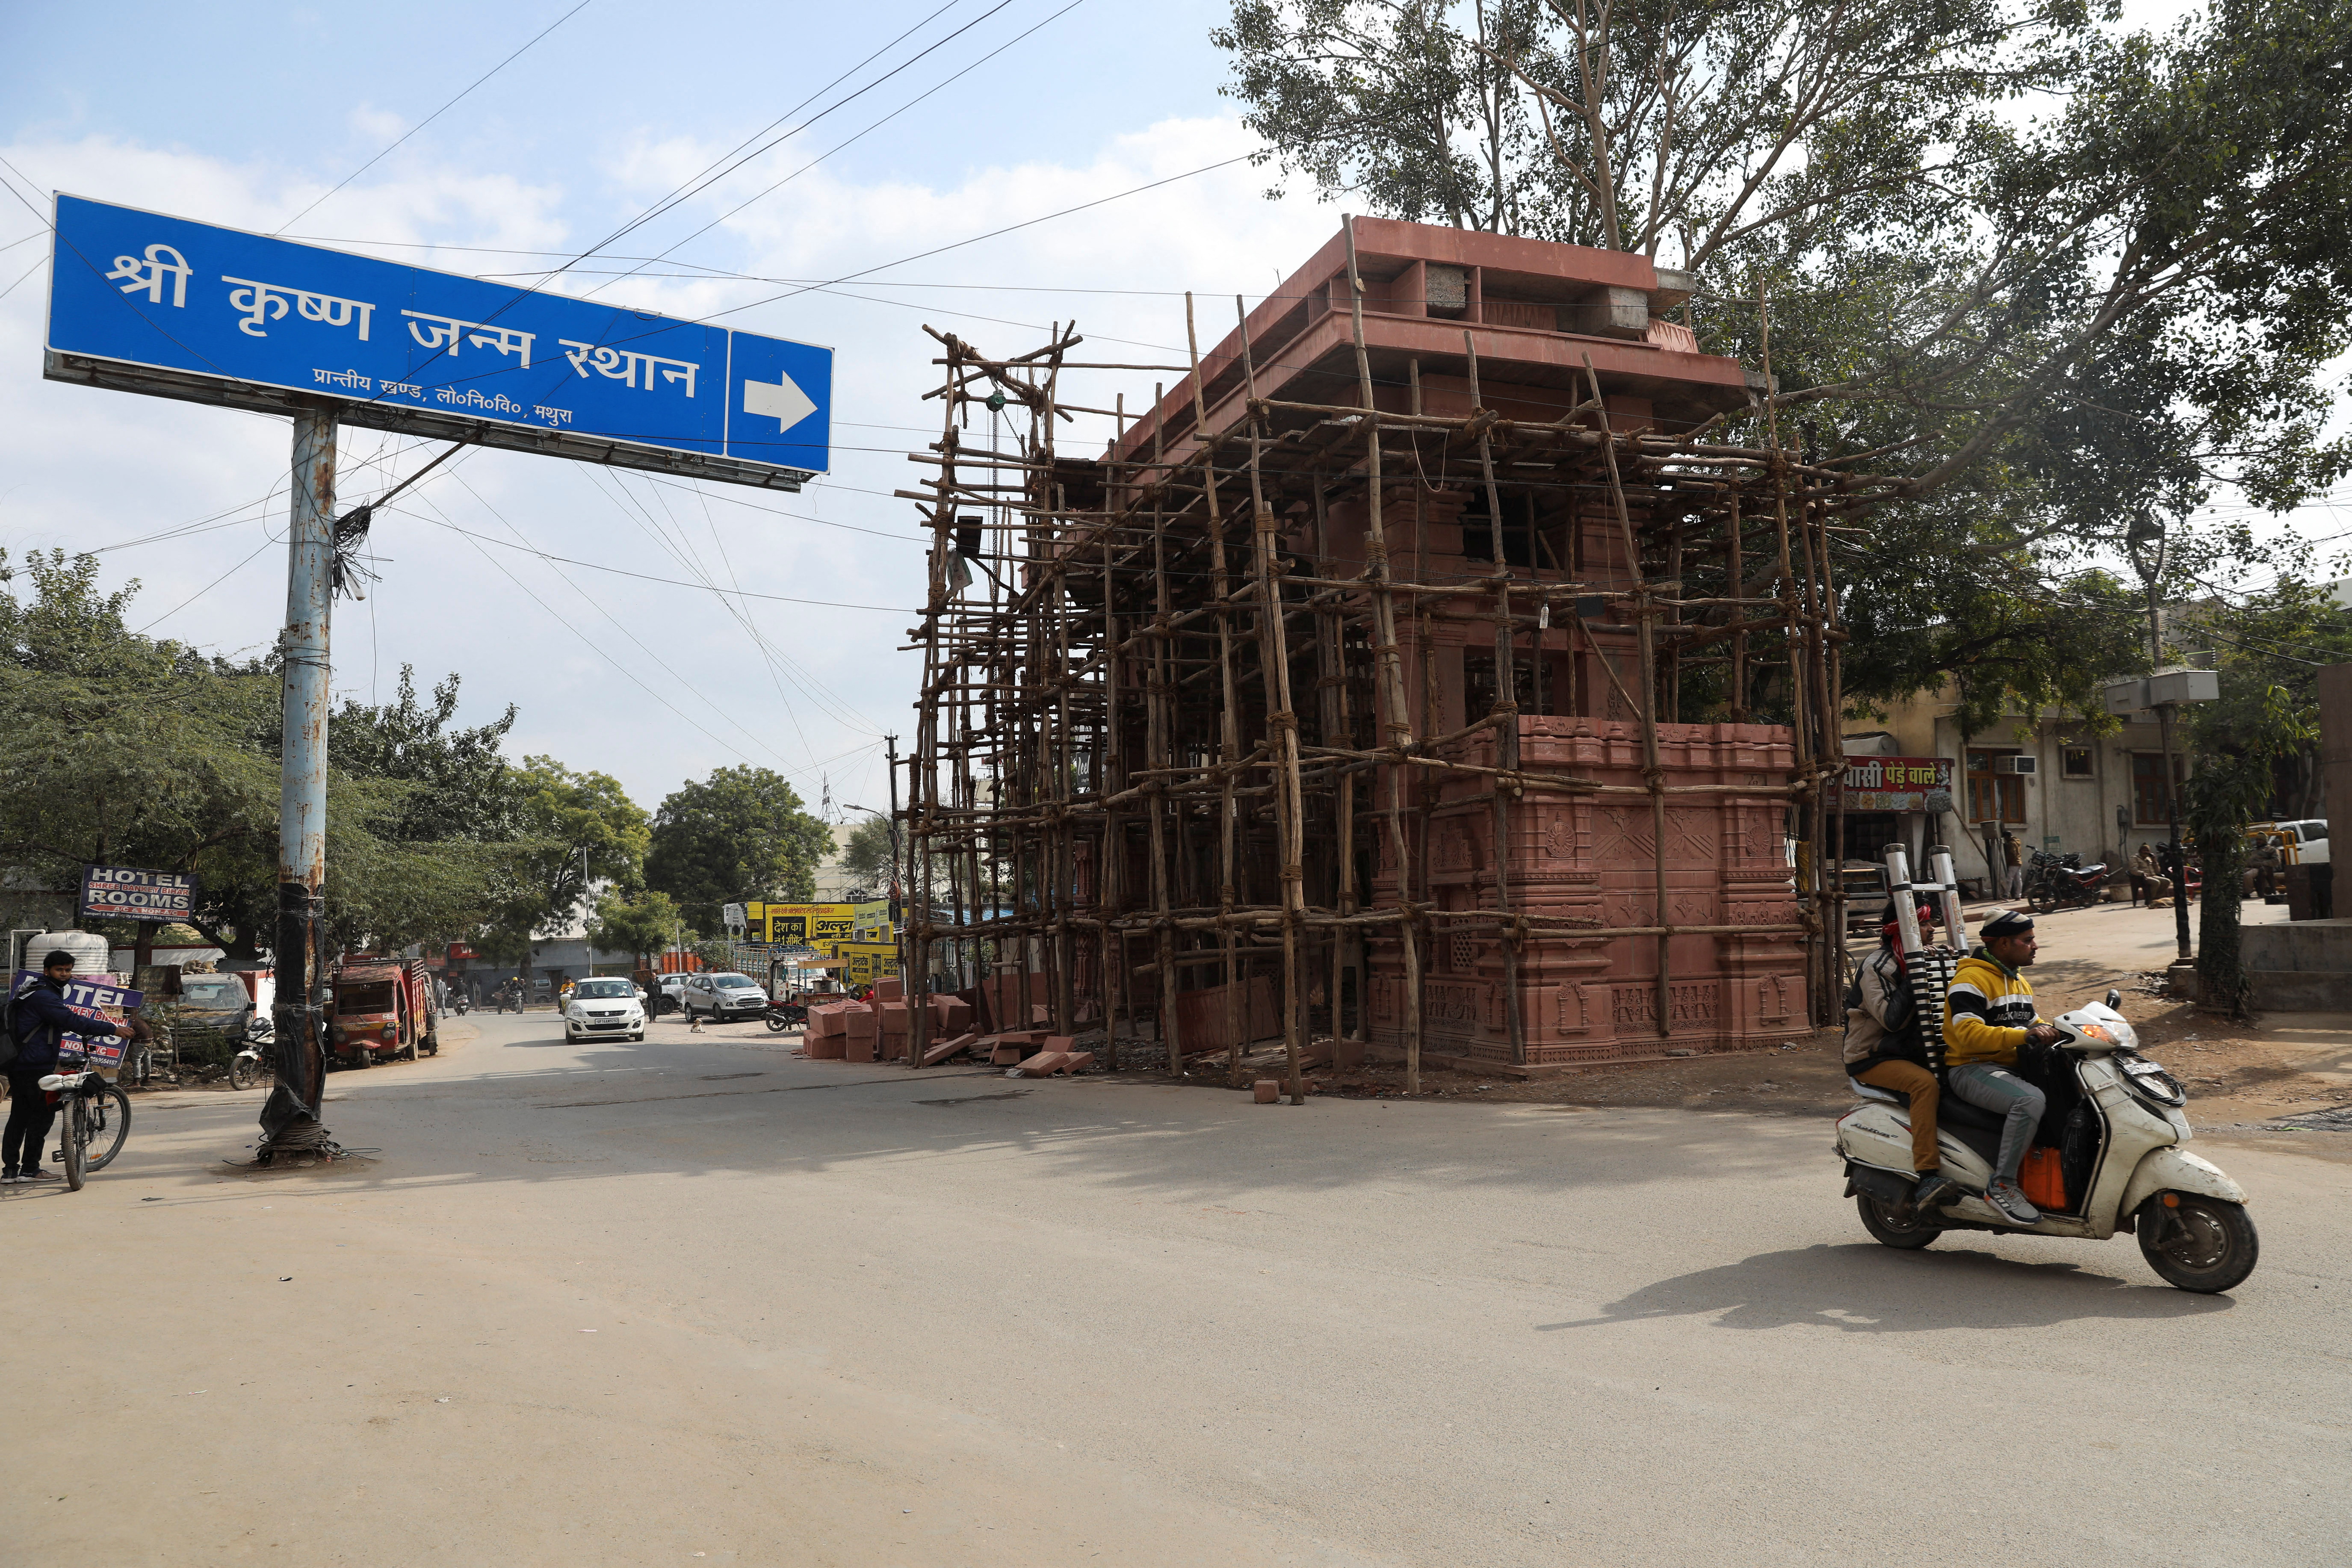 A motor bike passes by an ongoing construction of an entrance to the Hindu temple in Mathura town